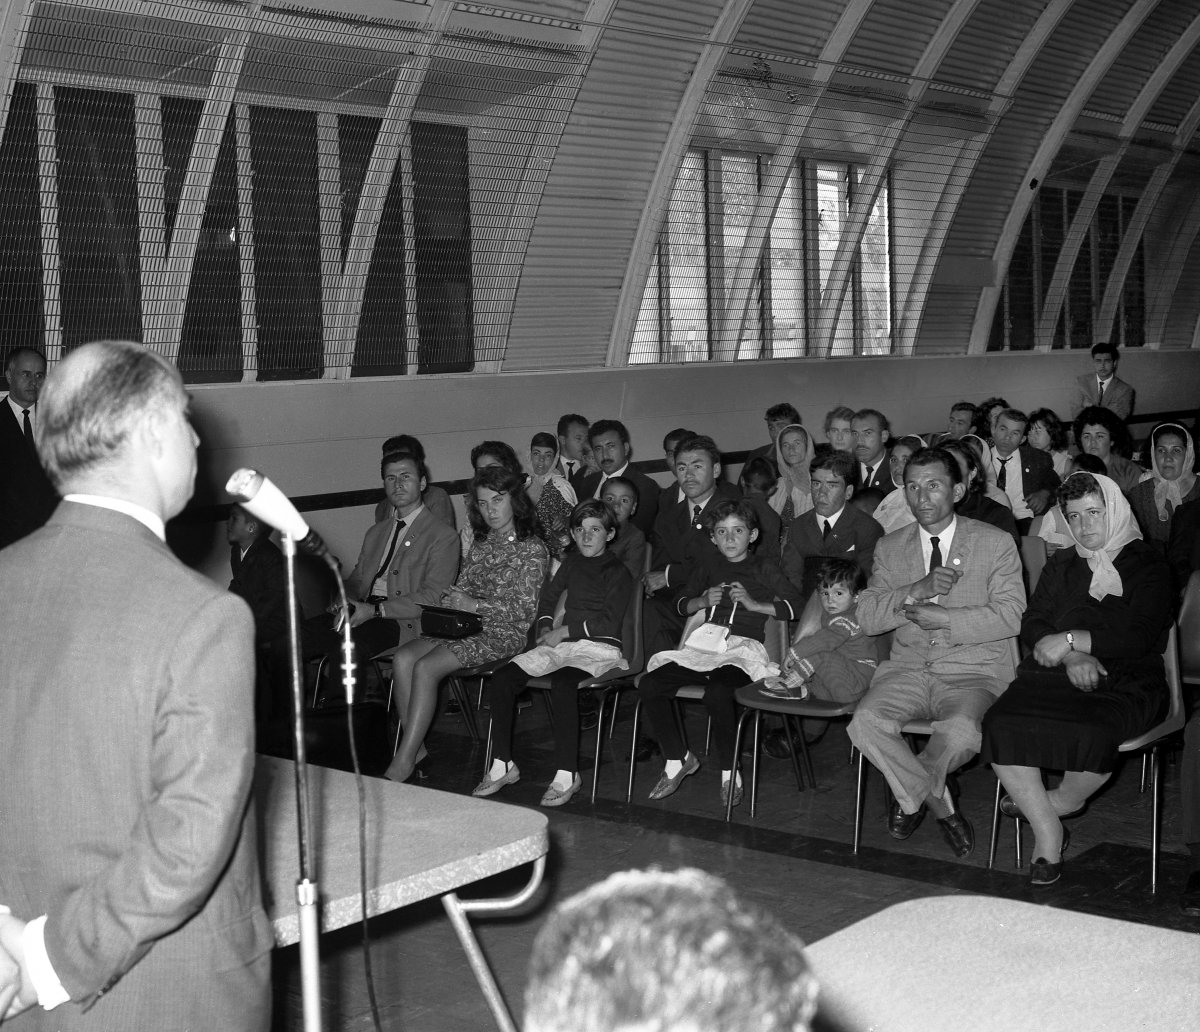 A photograph of a large group of people seated in an auditorium. A balding man is standing at a microphone addressing the audience.